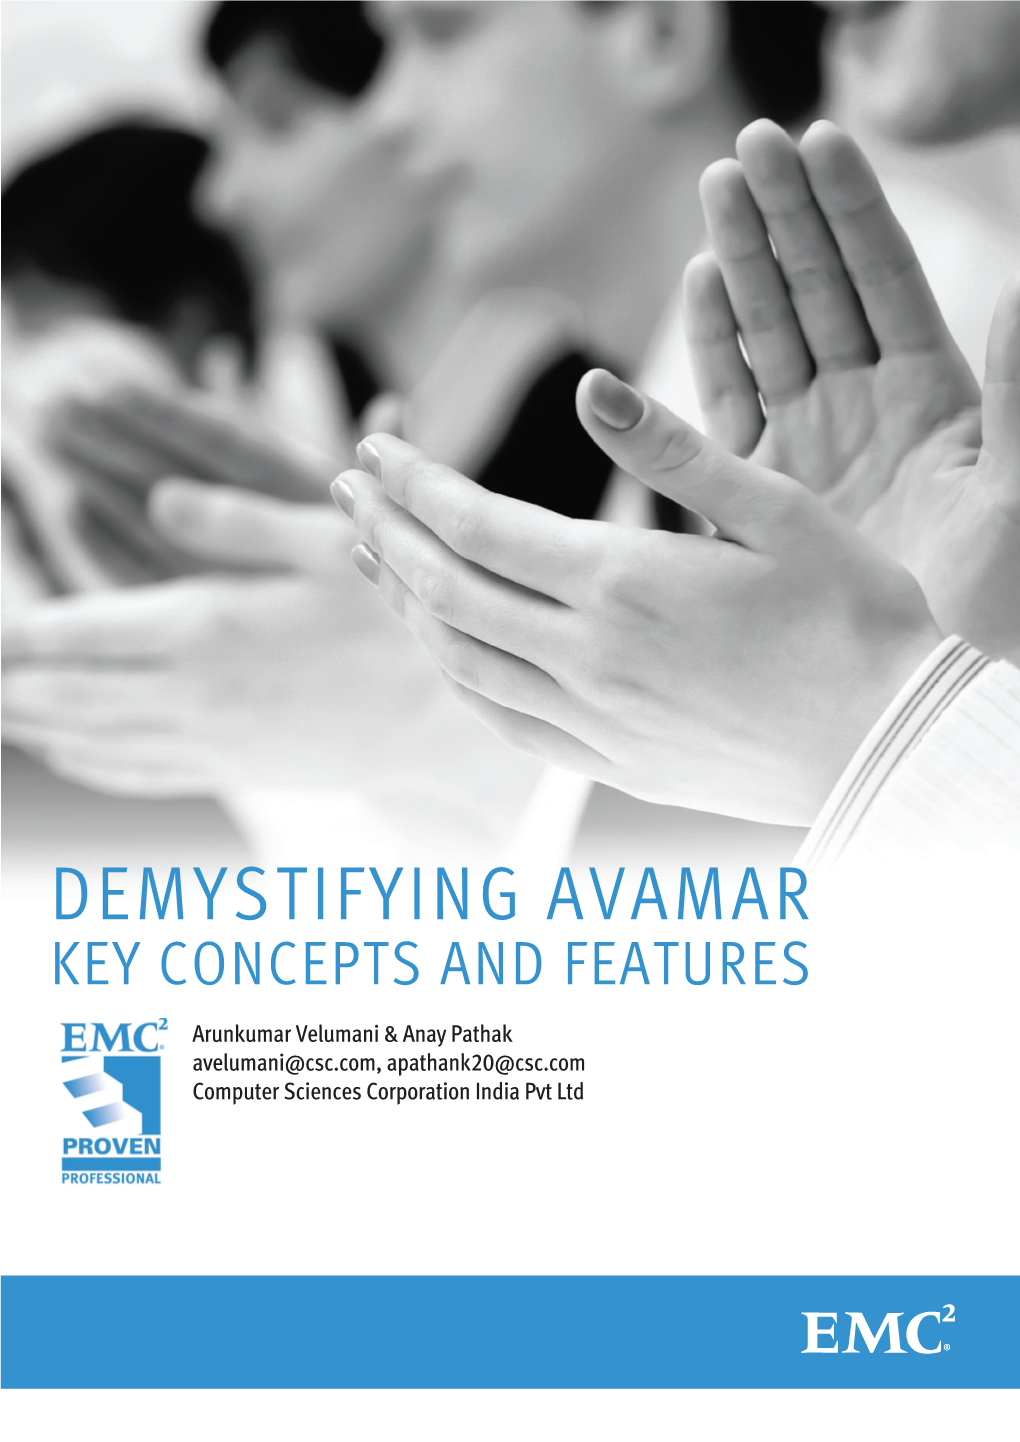 Demystifying Avamar Key Concepts and Features